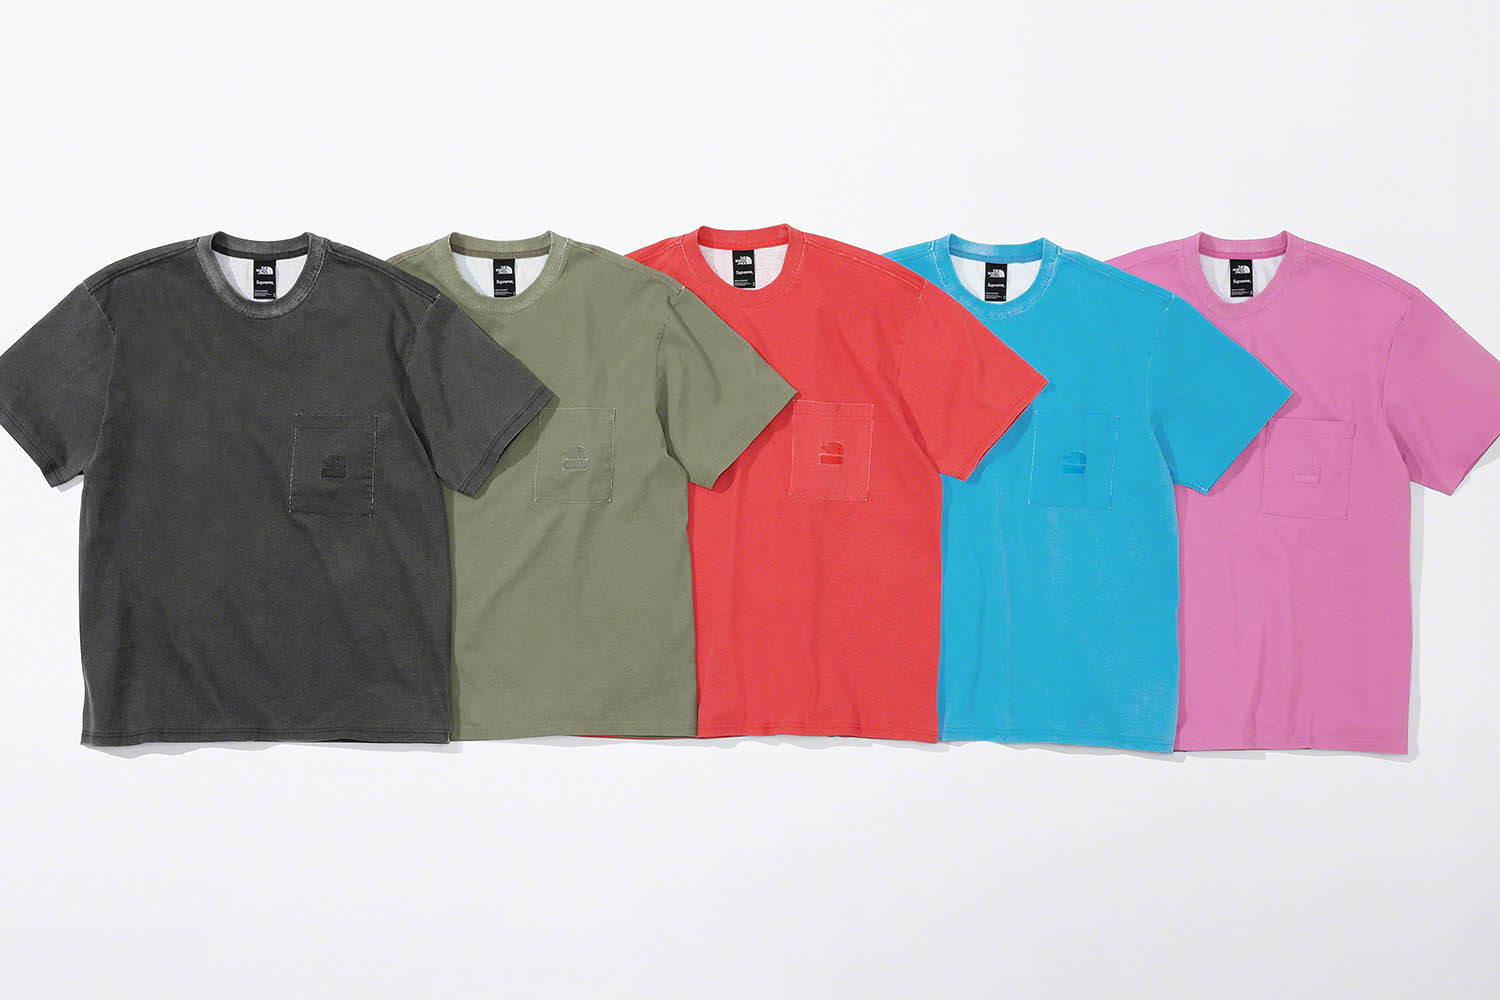 Supreme®/The North Face® Pigment Printed Pocket Tee | Supreme 21ss